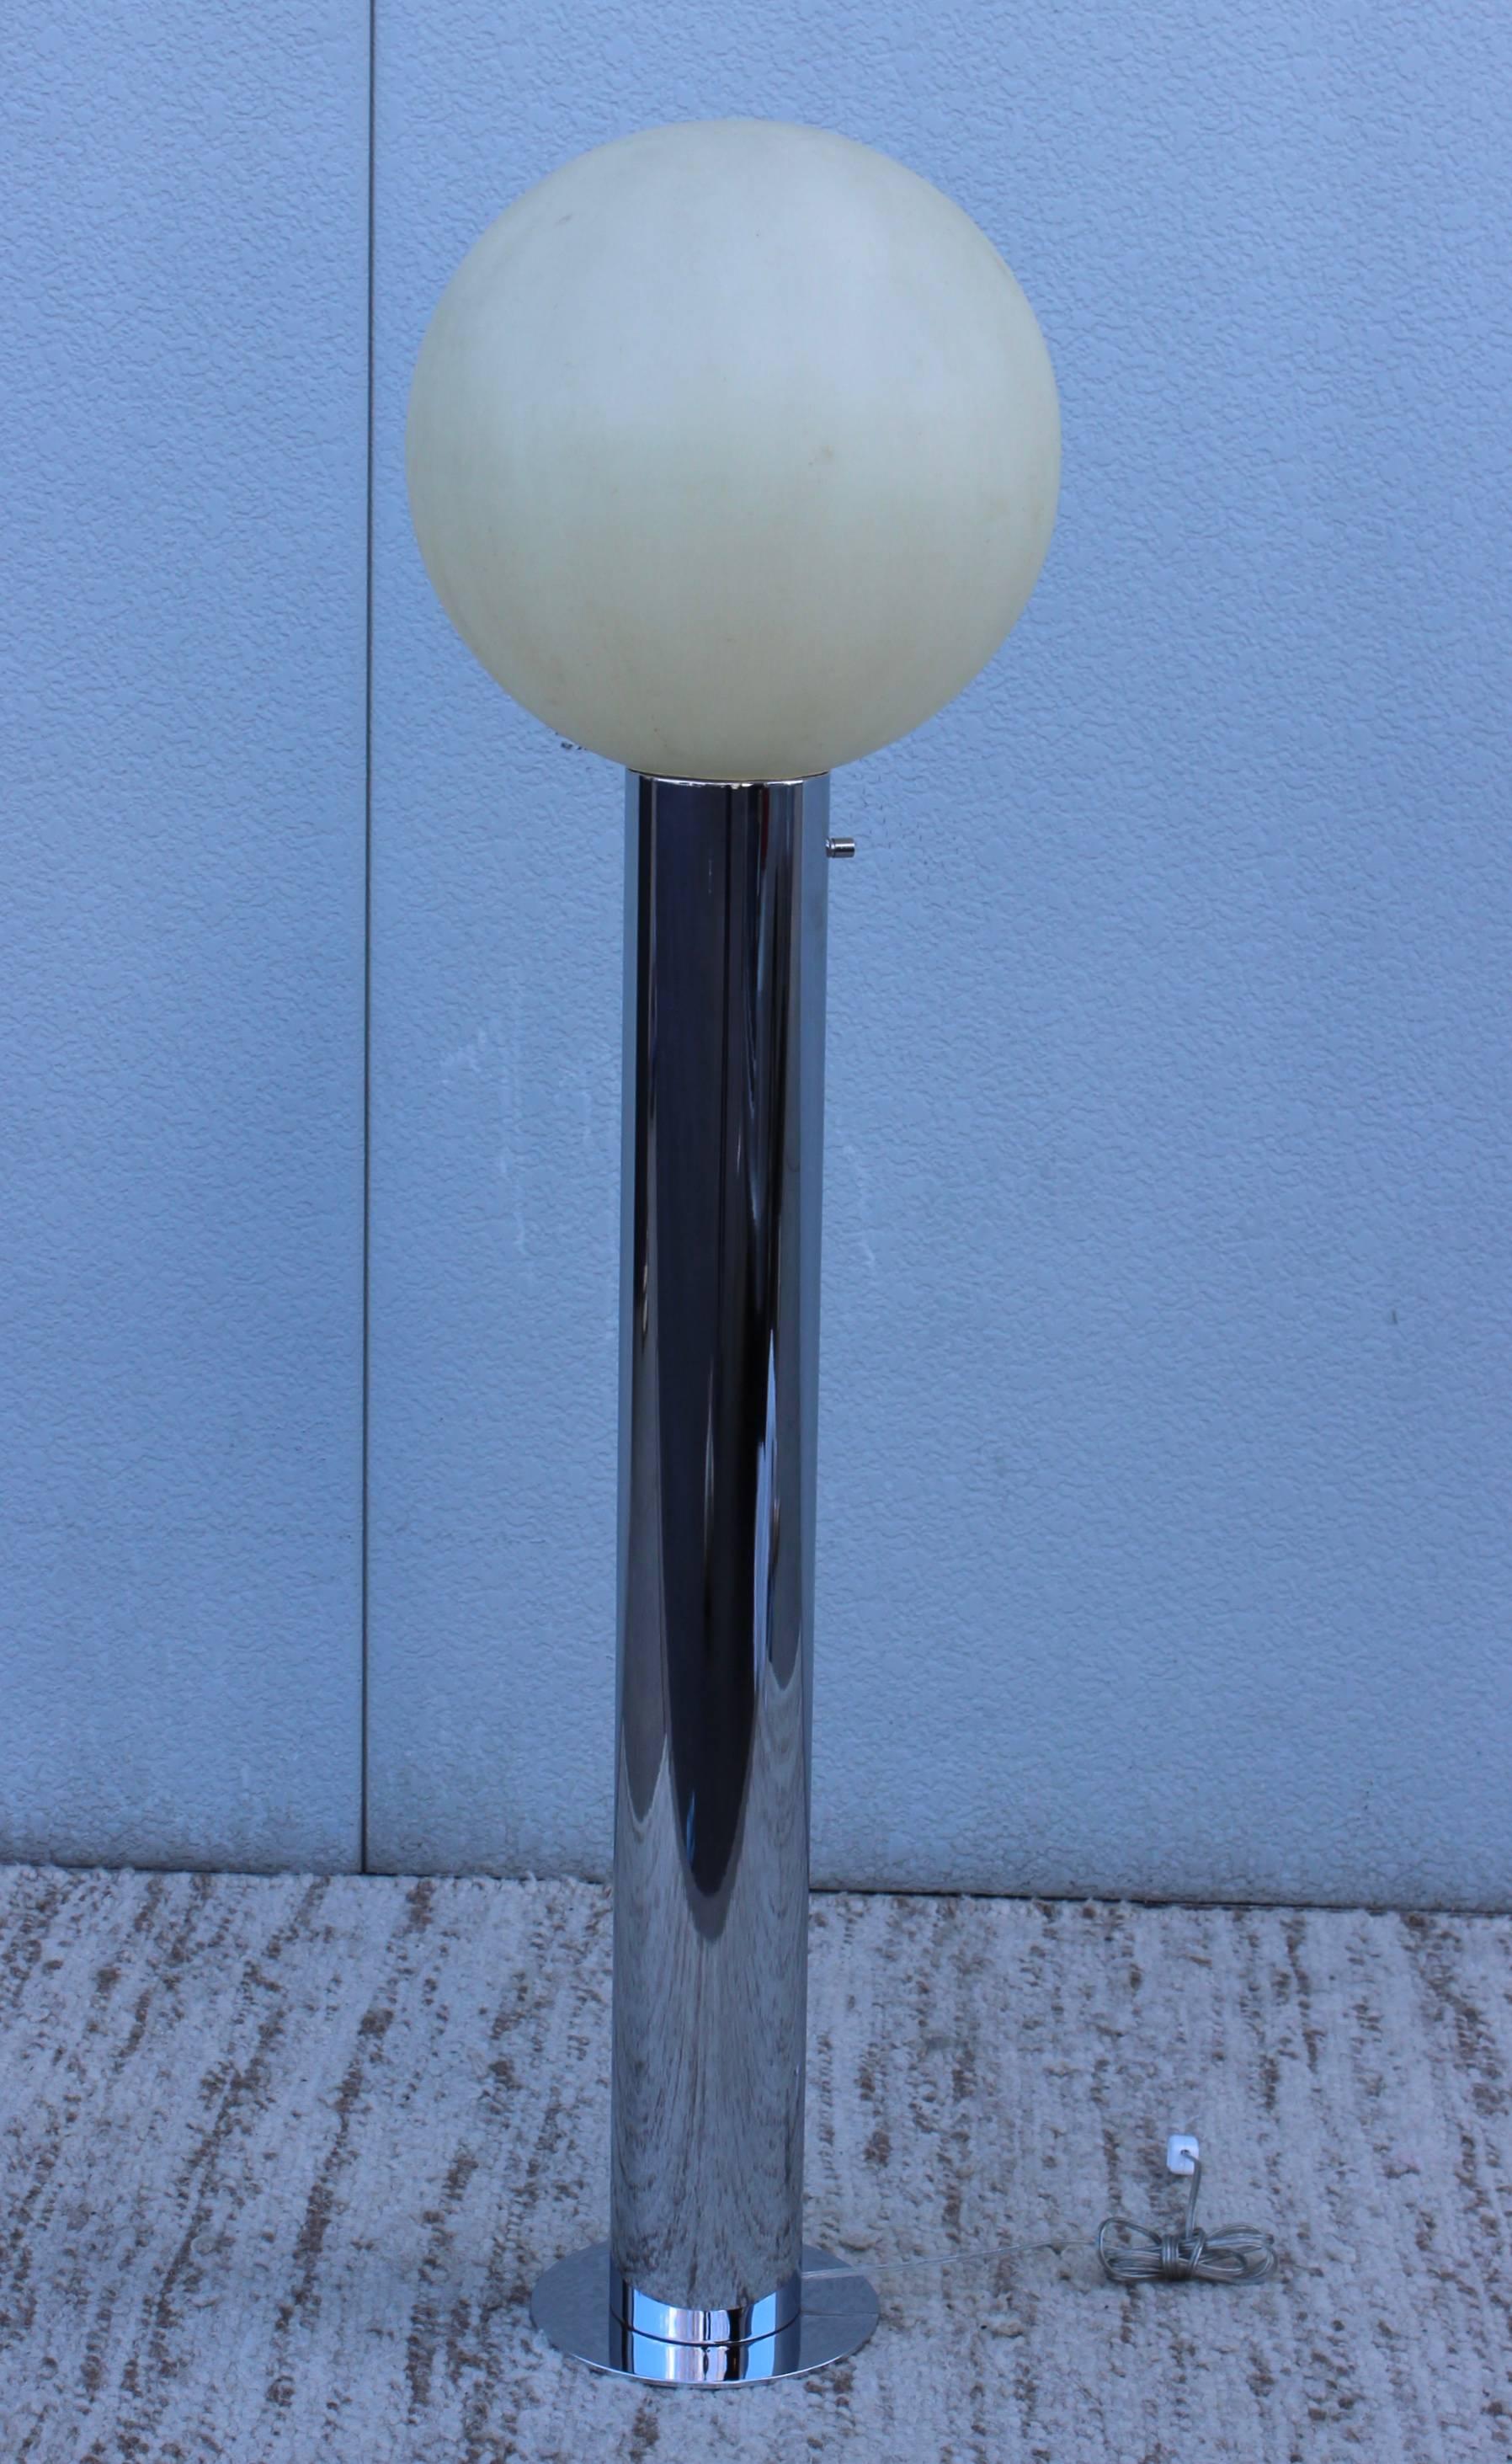 1960s chrome floor lamp with frosted plastic shade.

Newly rewired.